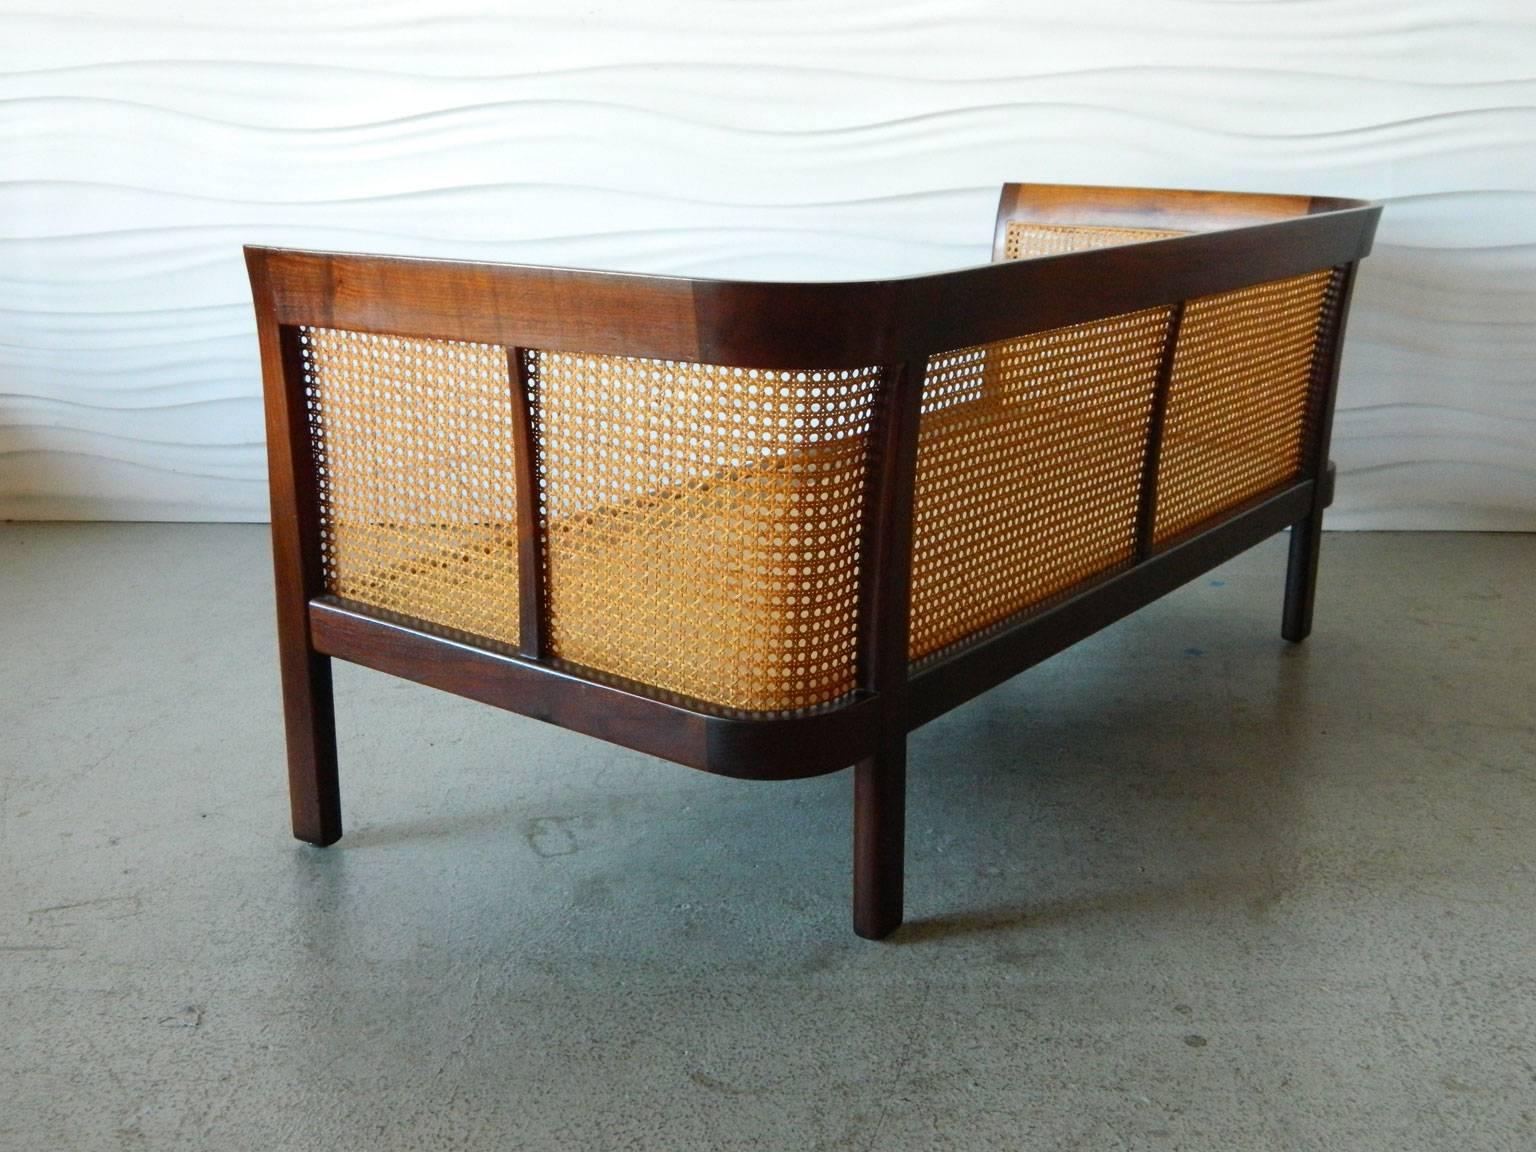 Erwin-Lambeth Caned Settee In Good Condition For Sale In Baltimore, MD